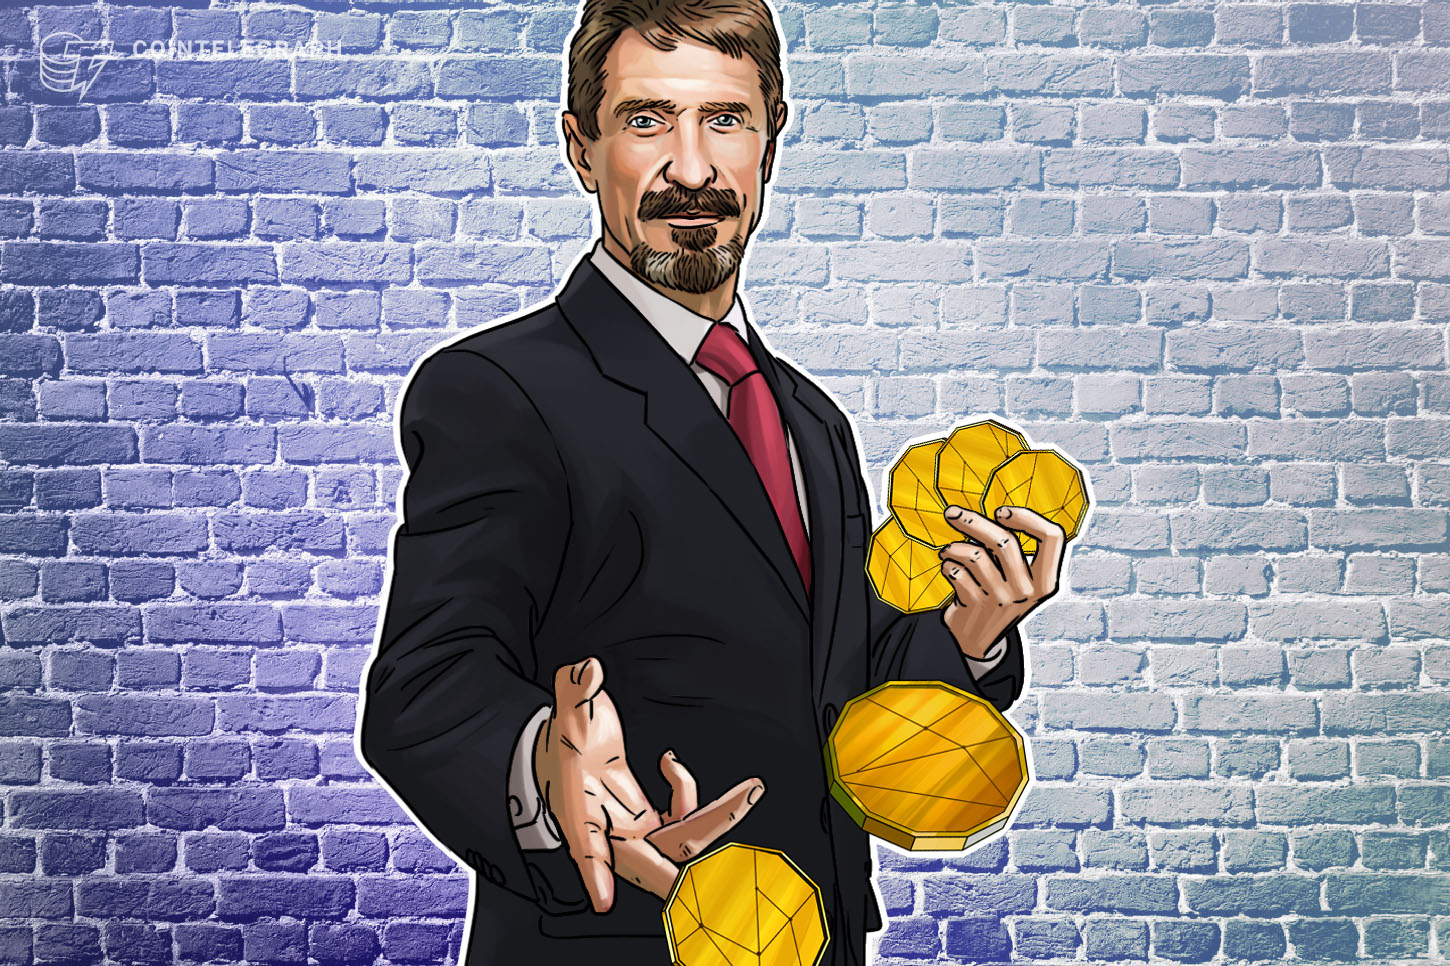 McAfee continues to advertise cryptocurrencies from his Spanish jail cell